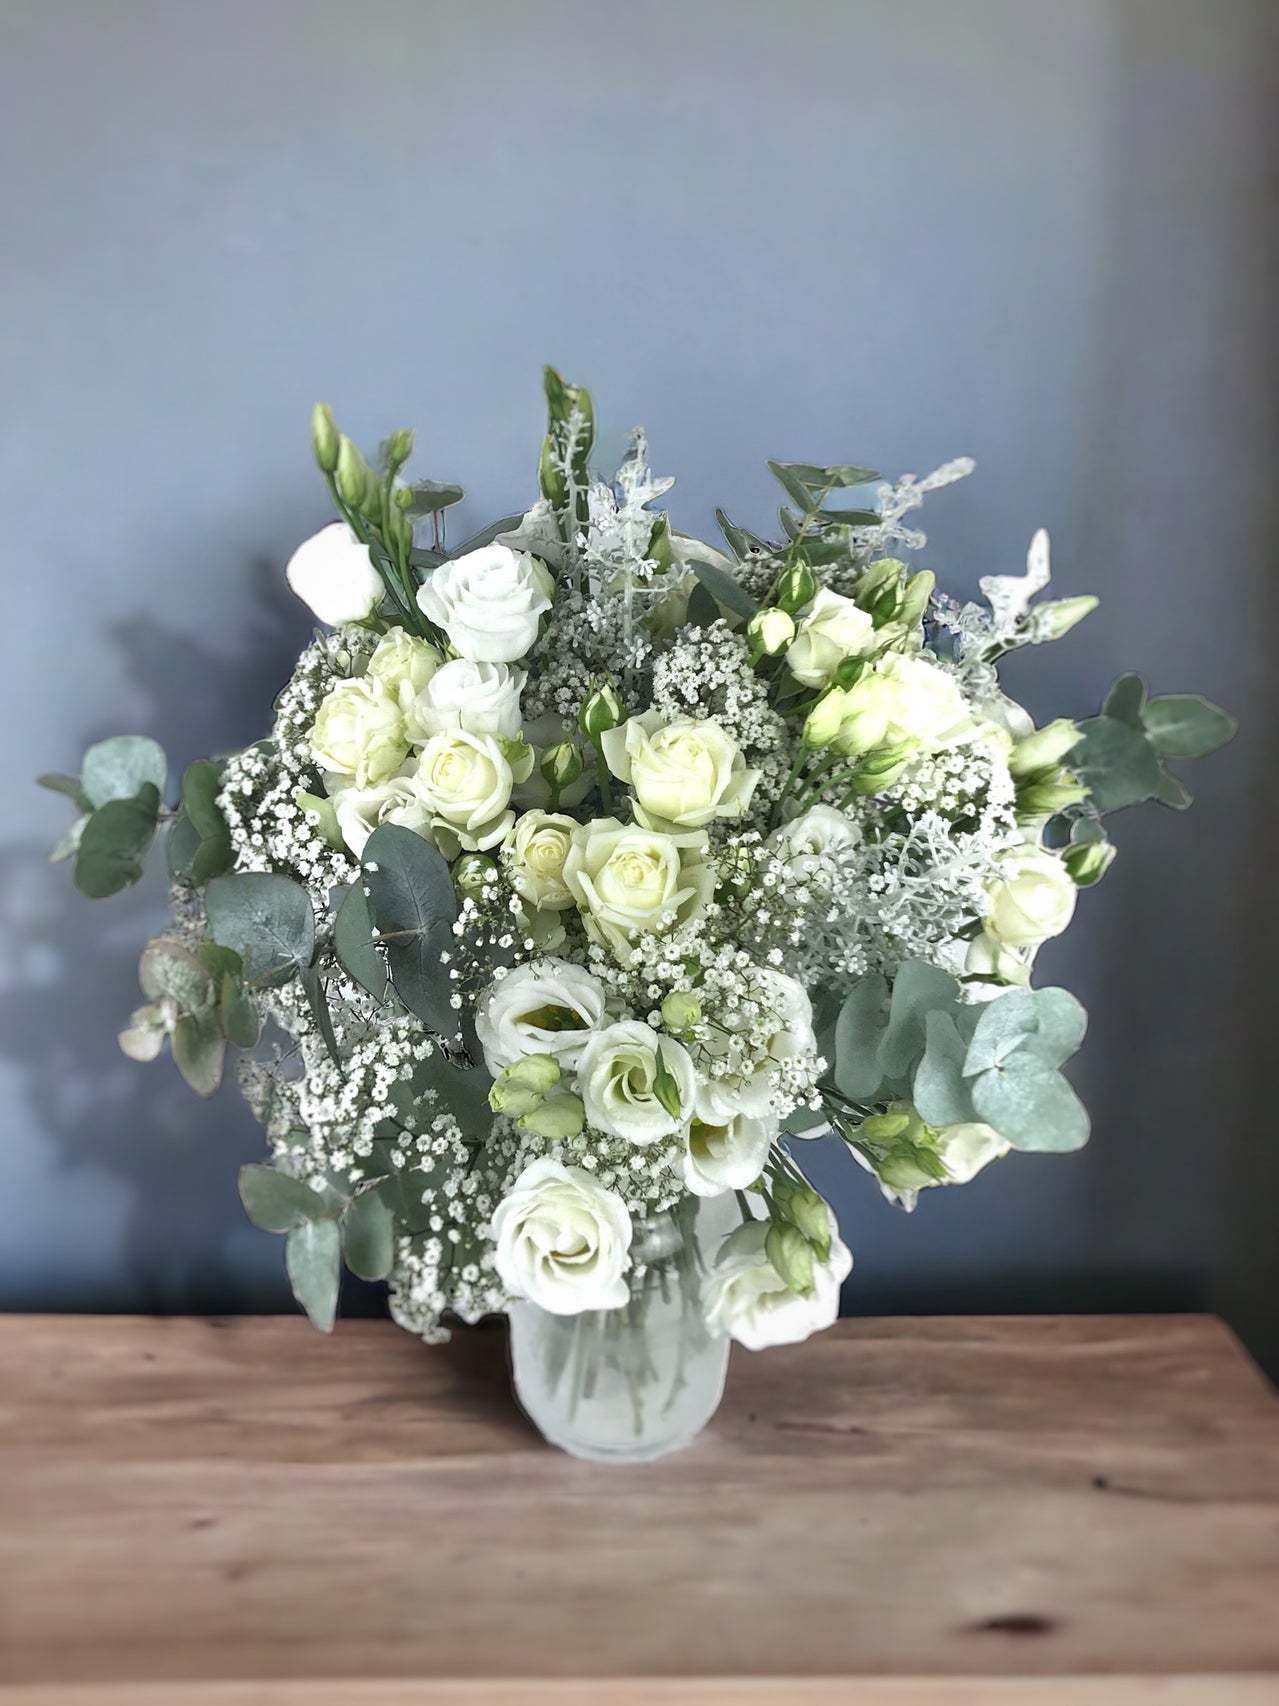 Birthday bouquet with white flowers - Bouquet 